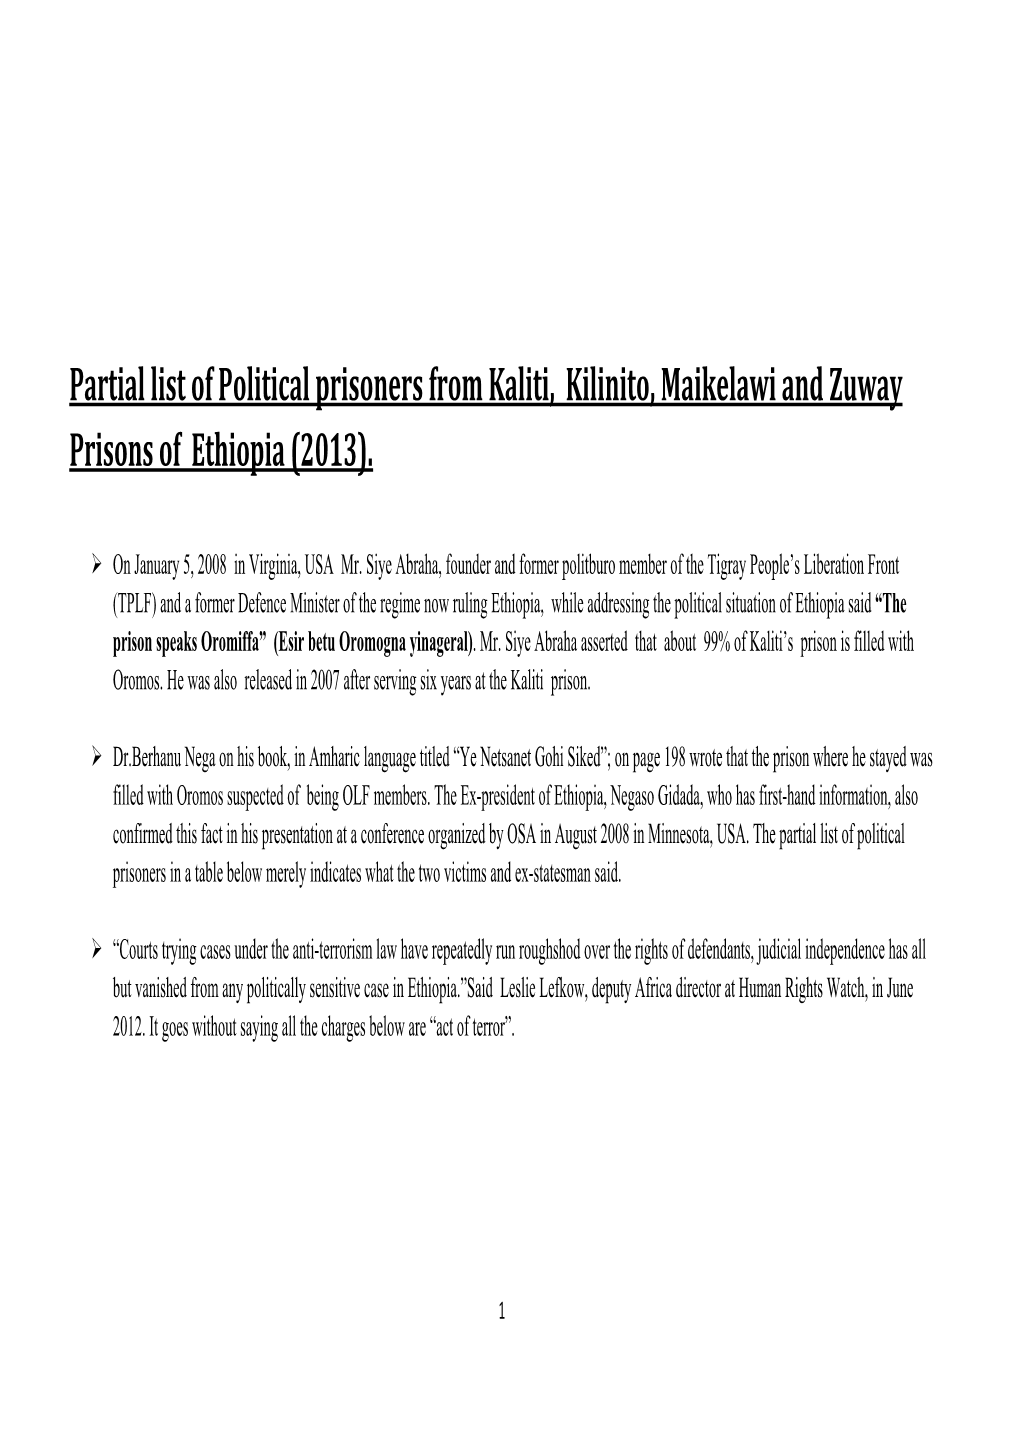 Partial List of Political Prisoners from Kaliti, Kilinito, Maikelawi and Zuway Prisons of Ethiopia (2013)